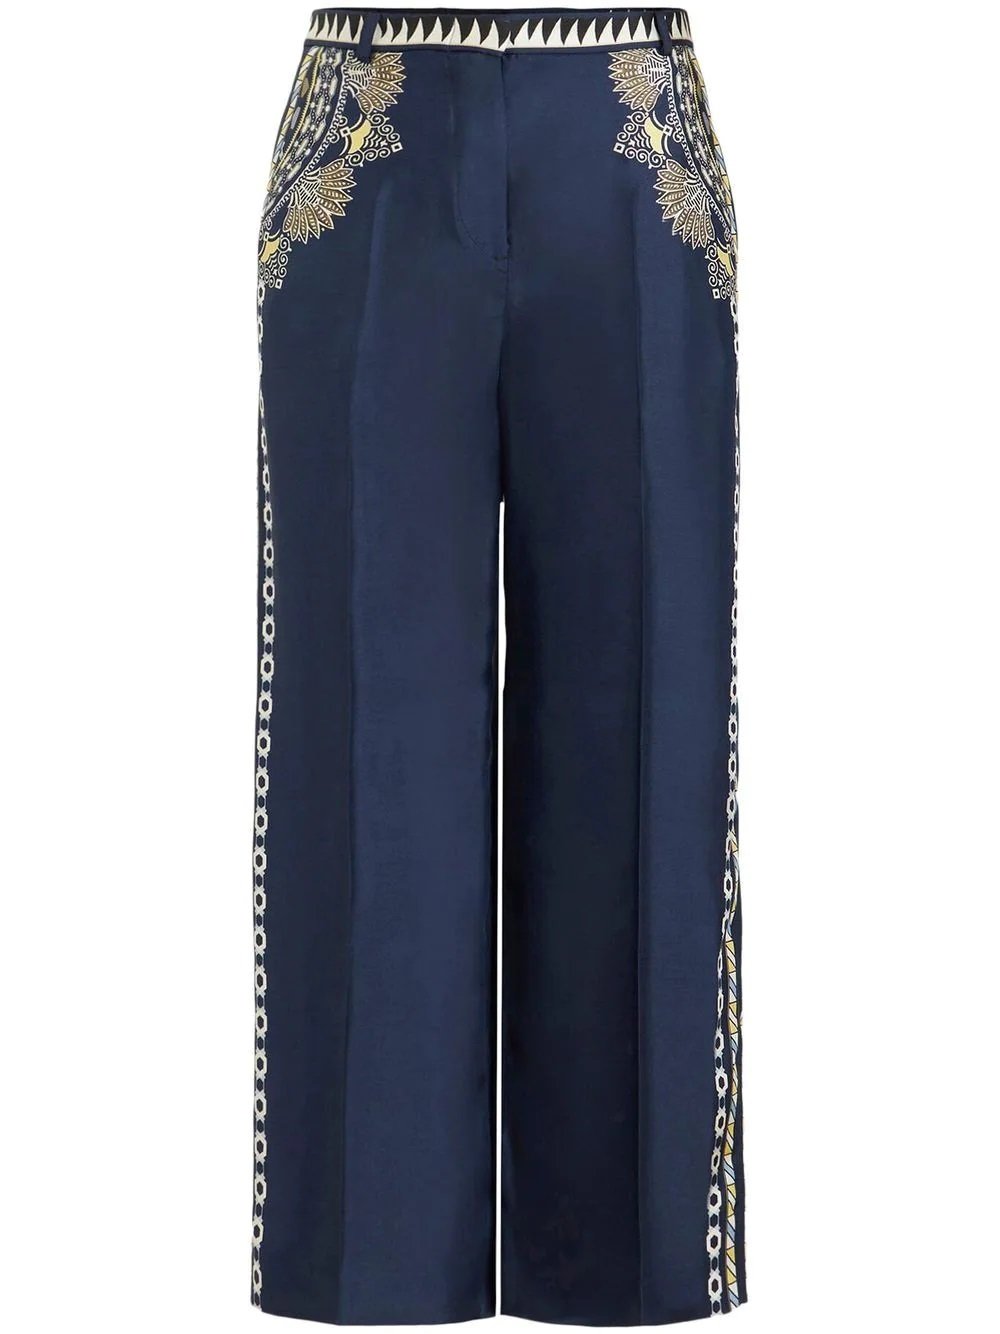 Etro Paisley Detailed Trousers in Navy.jpg